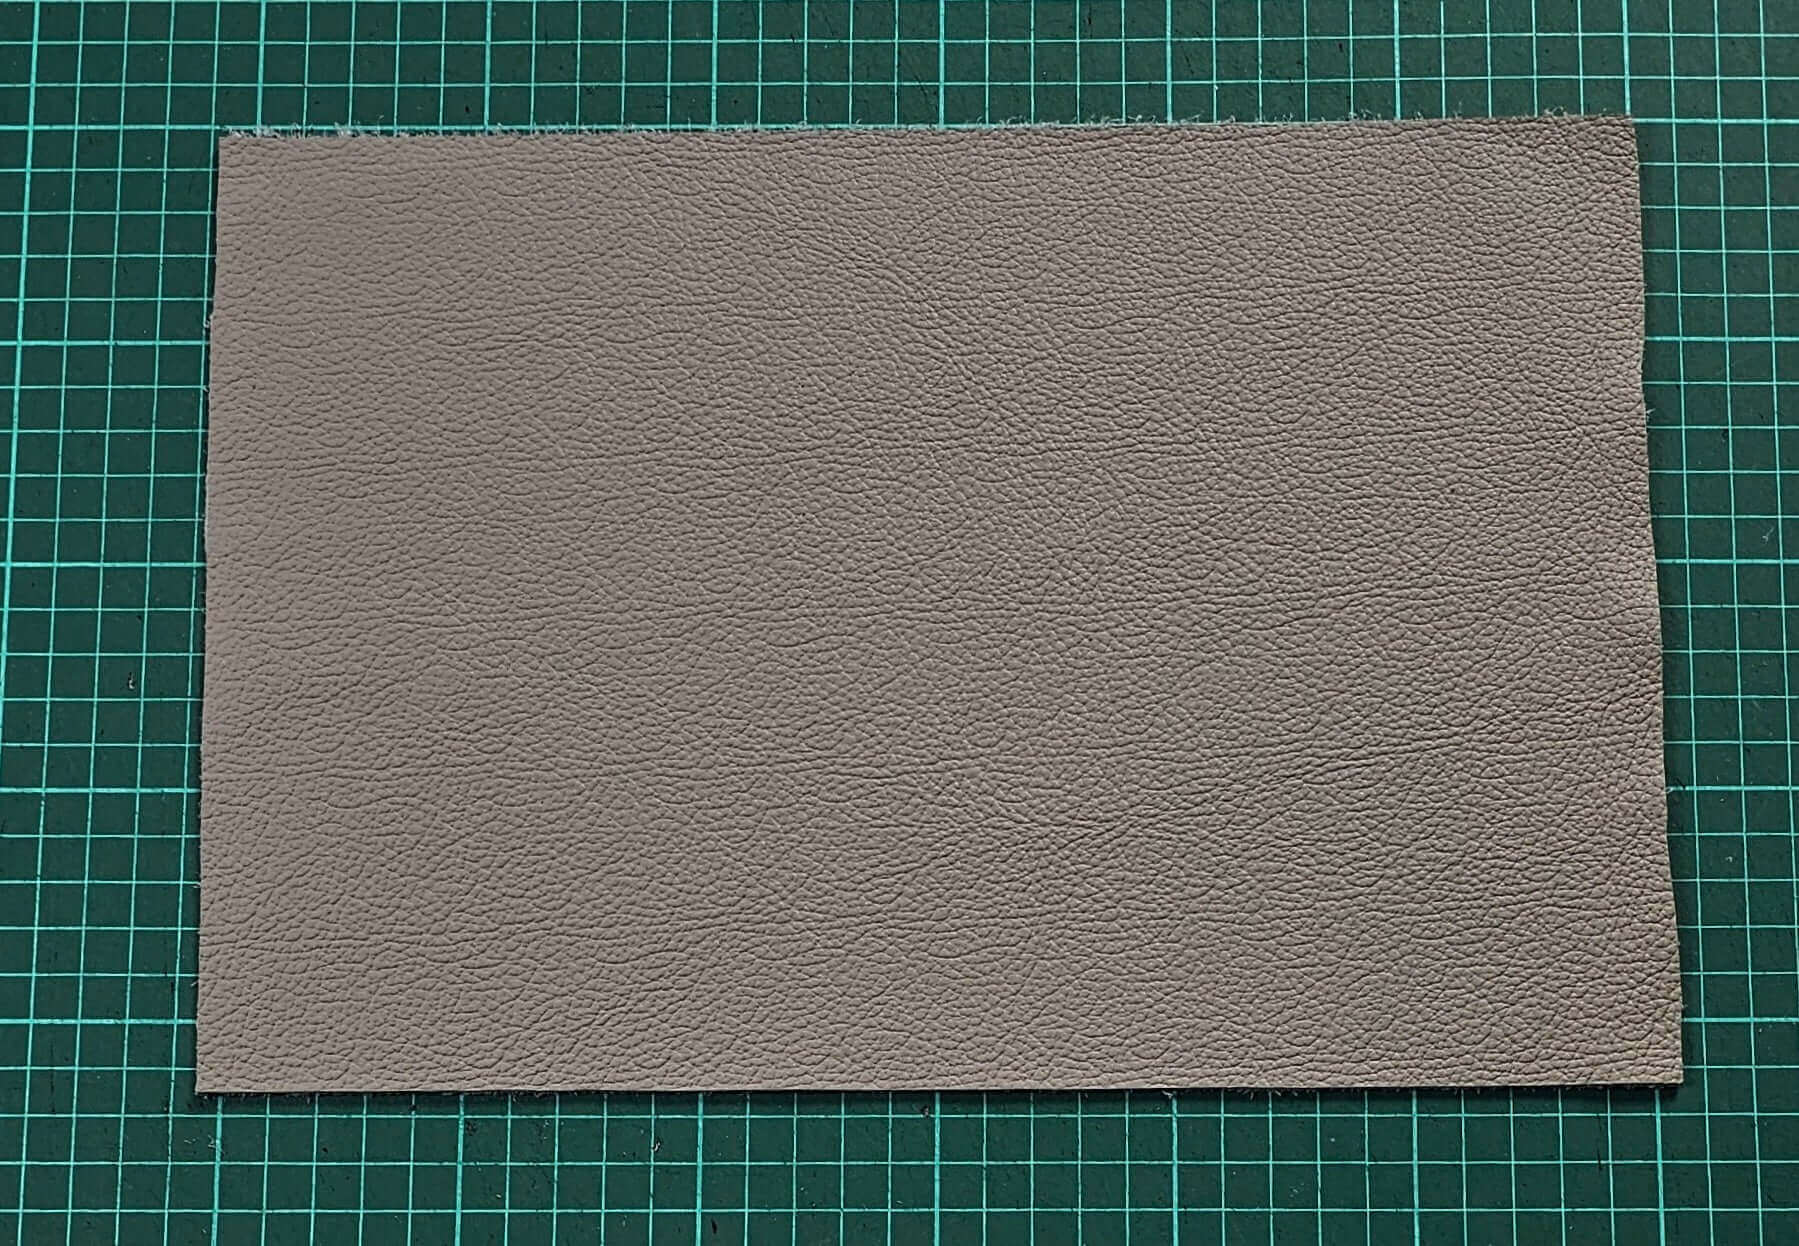 Mushroom leather sheets for crafting - Sets of 8